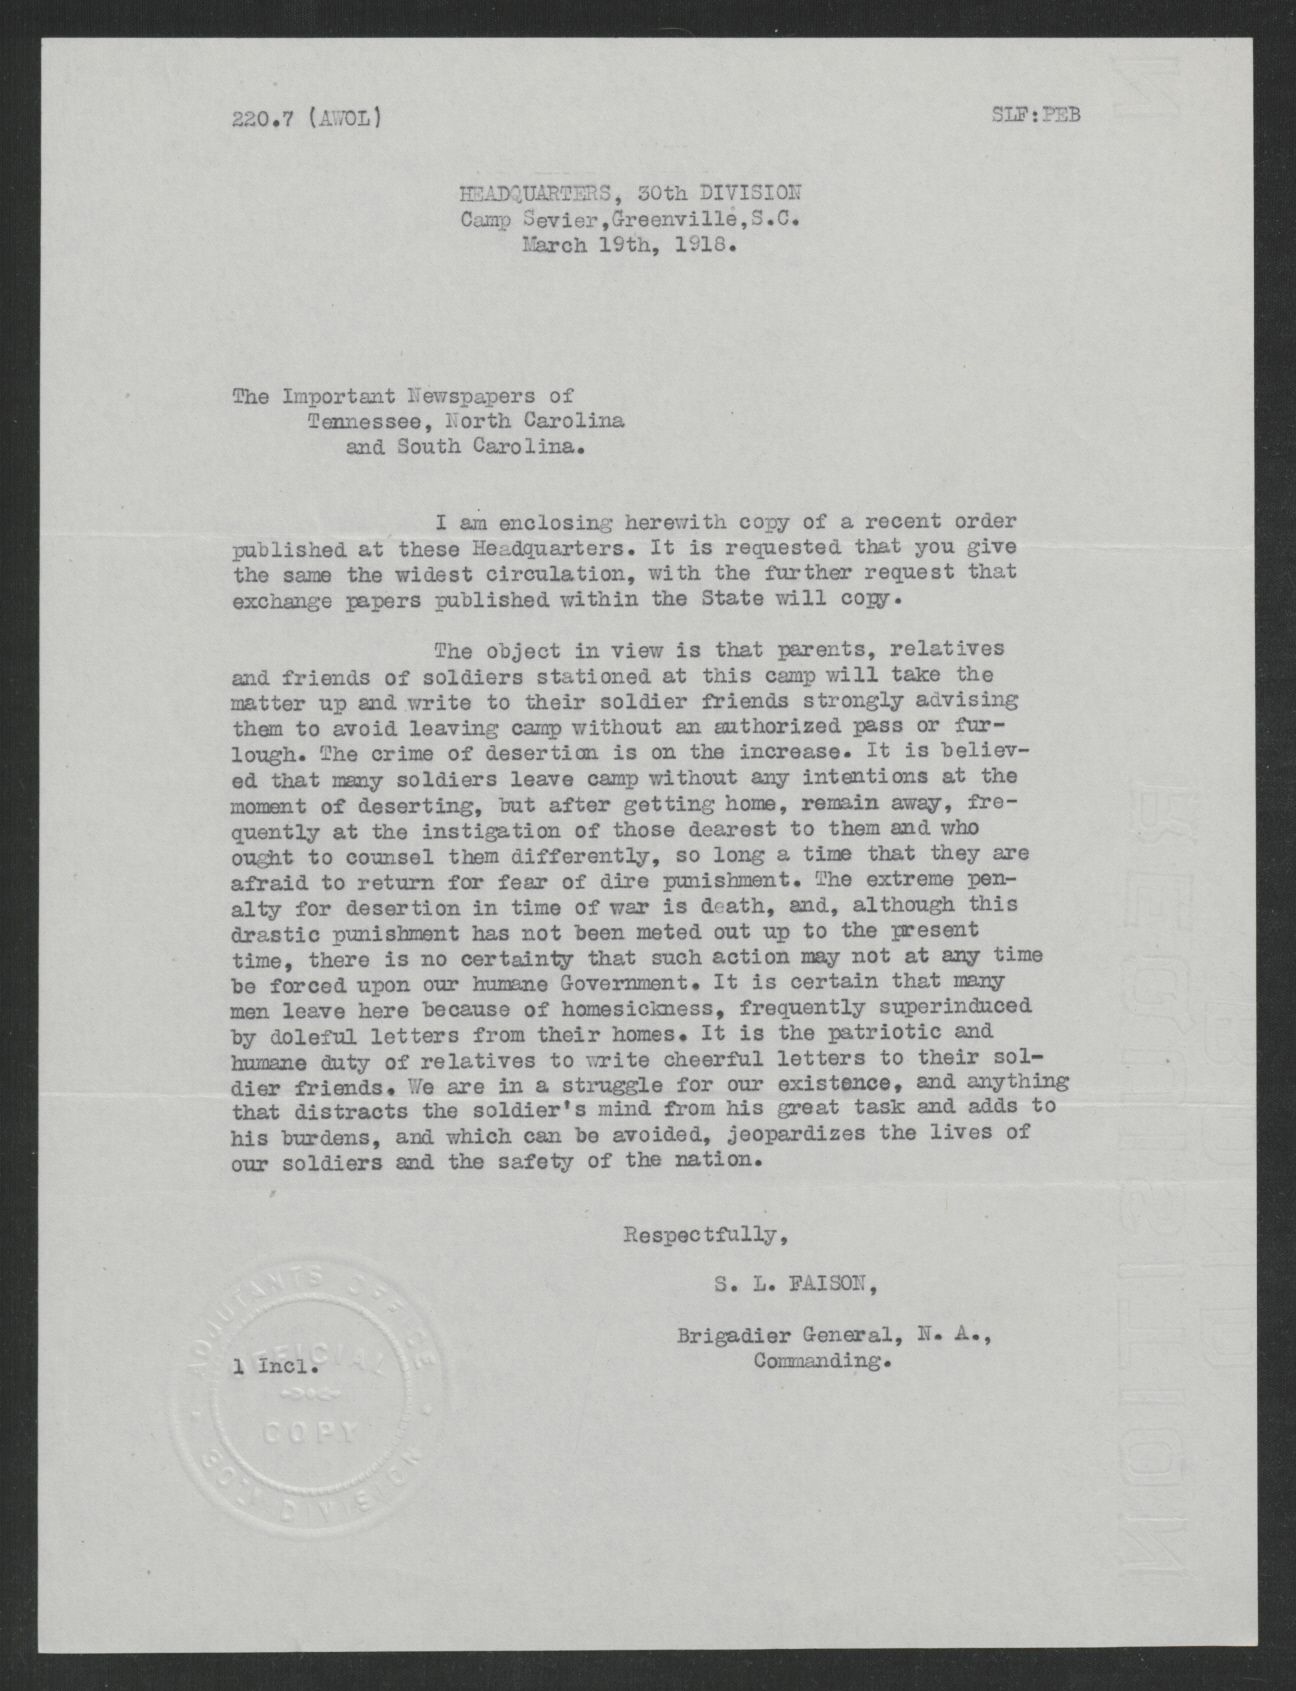 Letter from Samson L. Faison to the Important Newspapers of Tennessee, North Carolina, and South Carolina, March 19, 1918